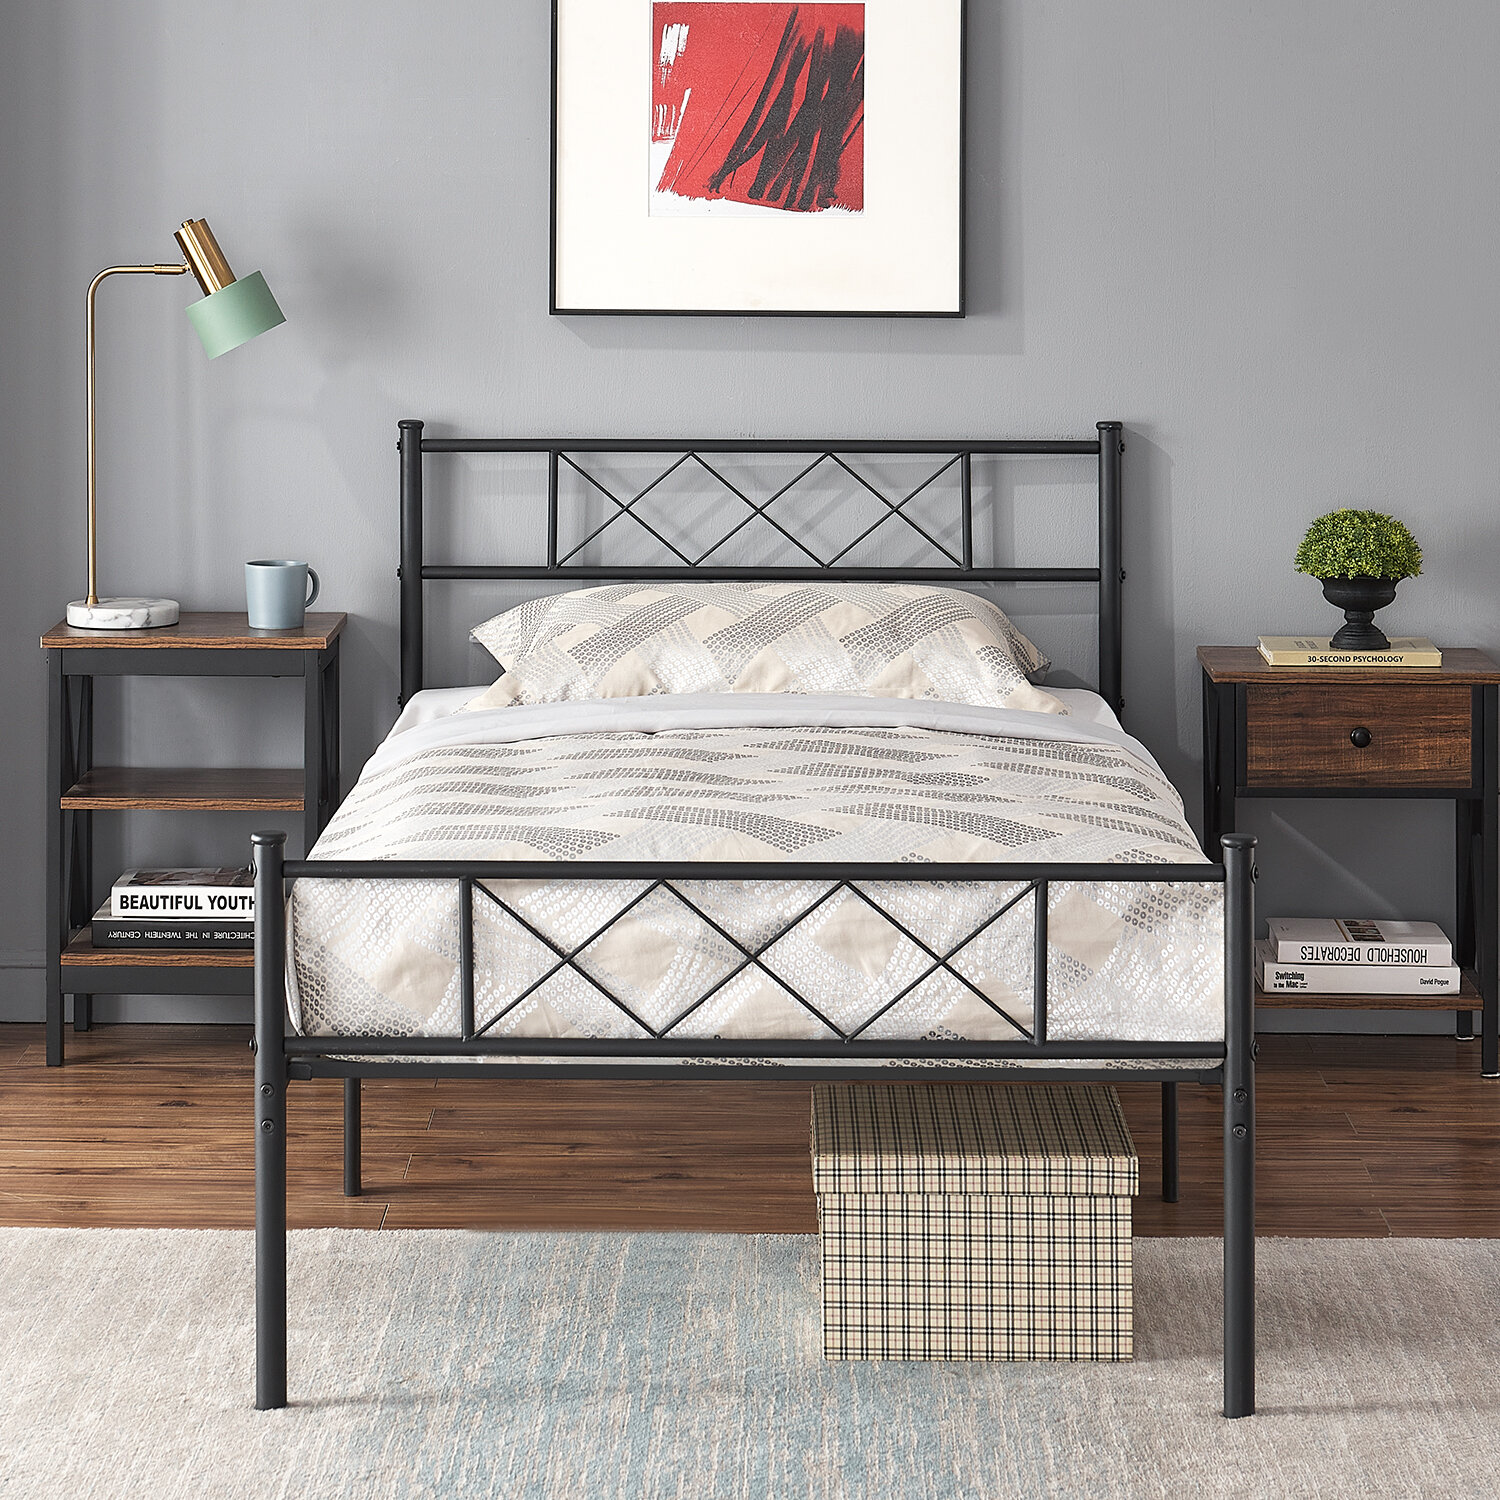 Metal Bed Frame KING Farmhouse Iron Vintage Mid Century Rustic Country Style Blk 